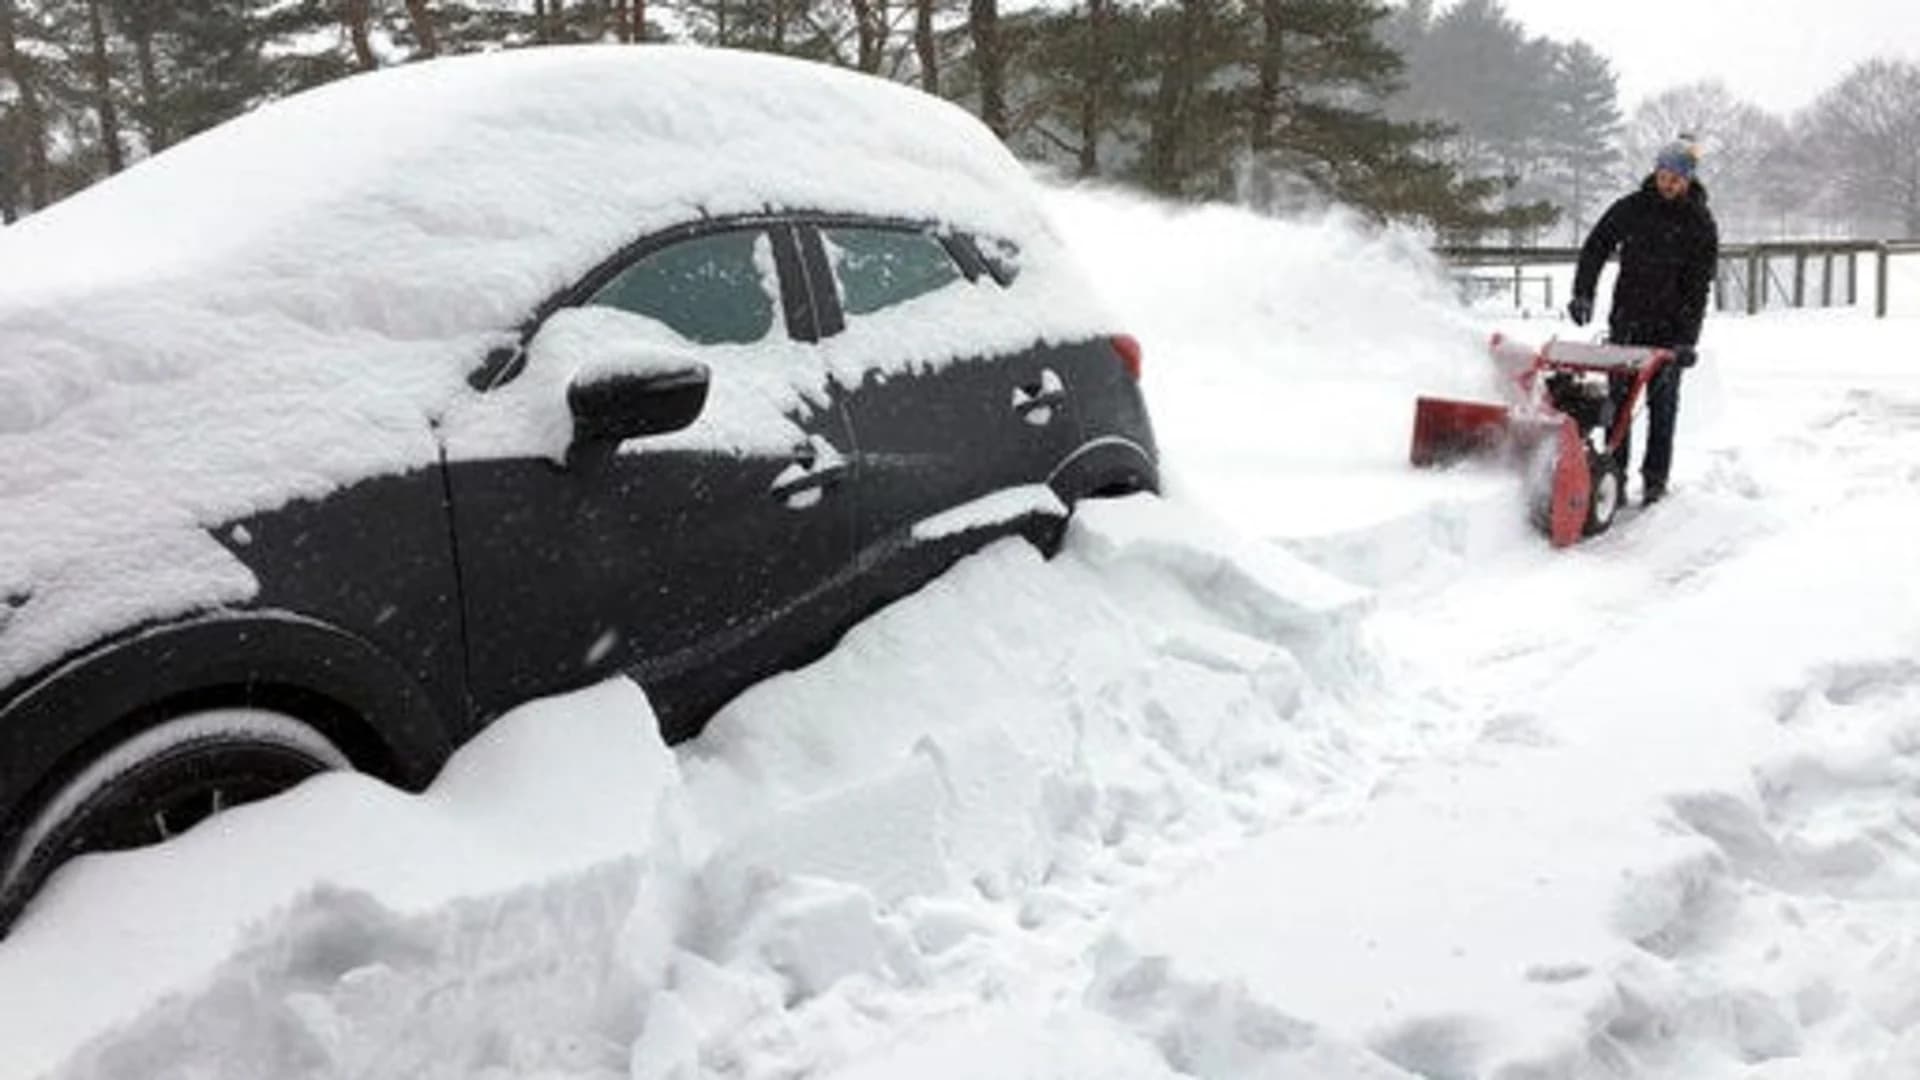 It's time to get your home and car prepared for winter weather